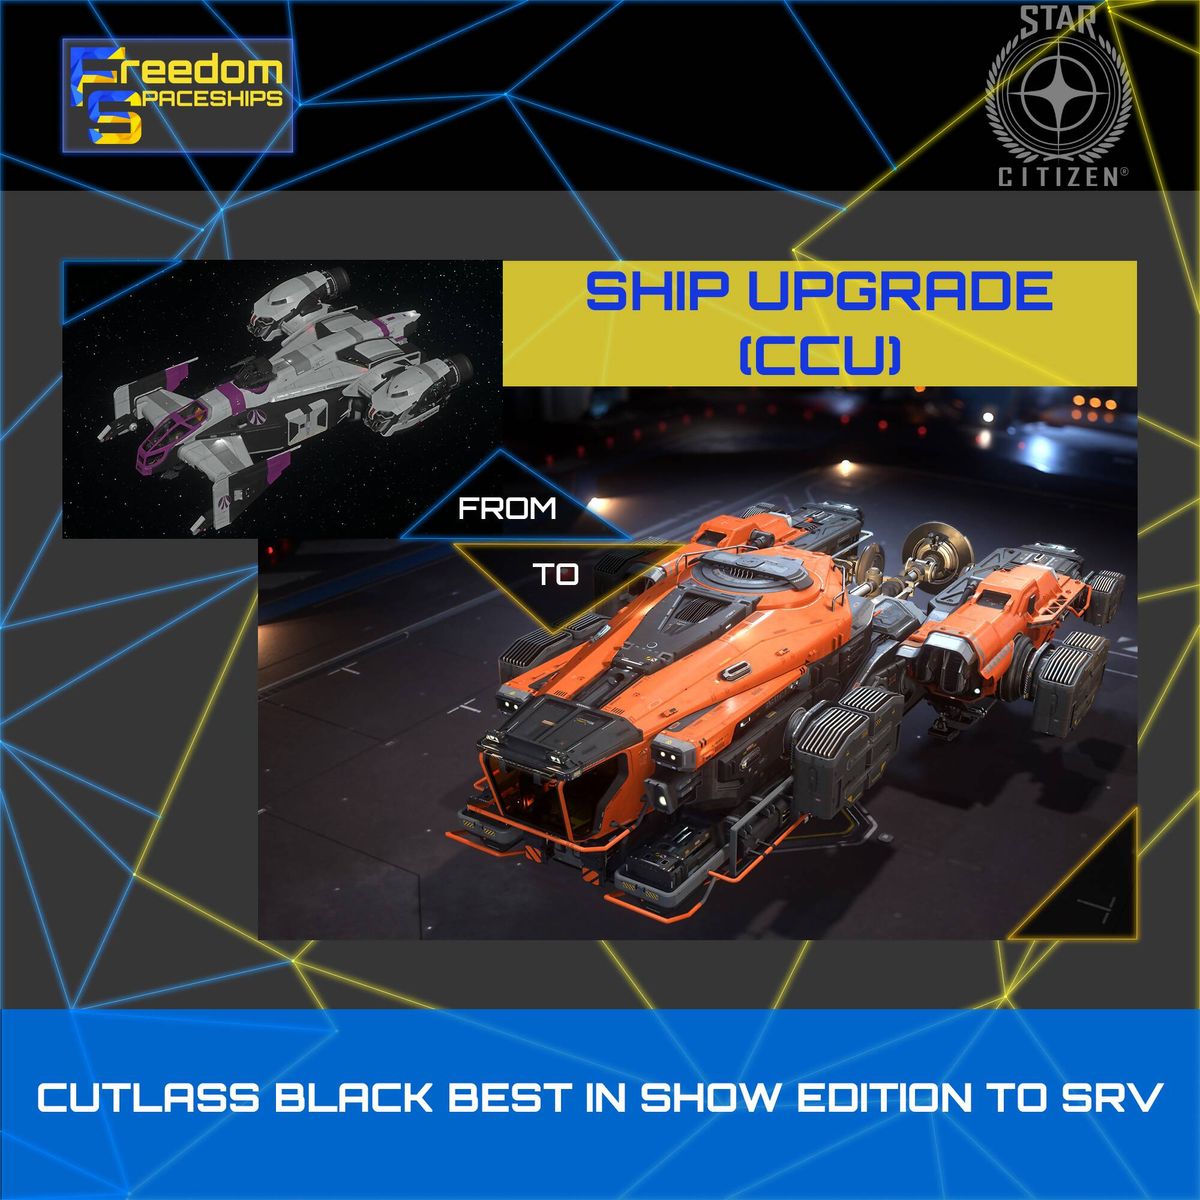 Upgrade - Cutlass Black Best In Show Edition to SRV